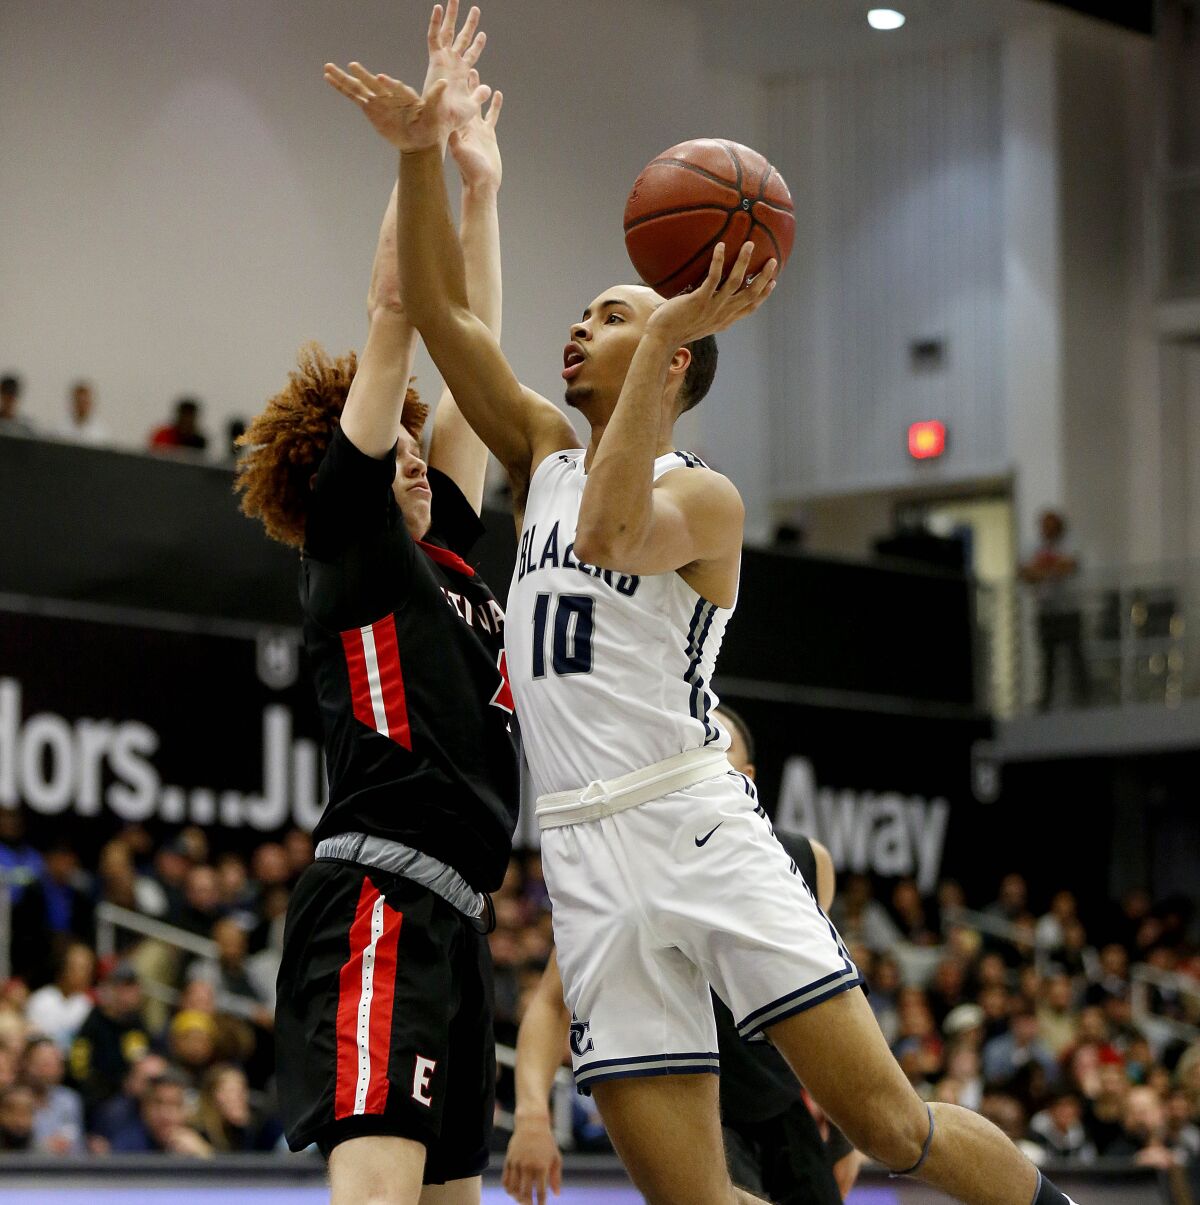 Sierra Canyon's Amari Bailey drives to the basket against Etiwanda's Brantly Stevenson in March 2020. 